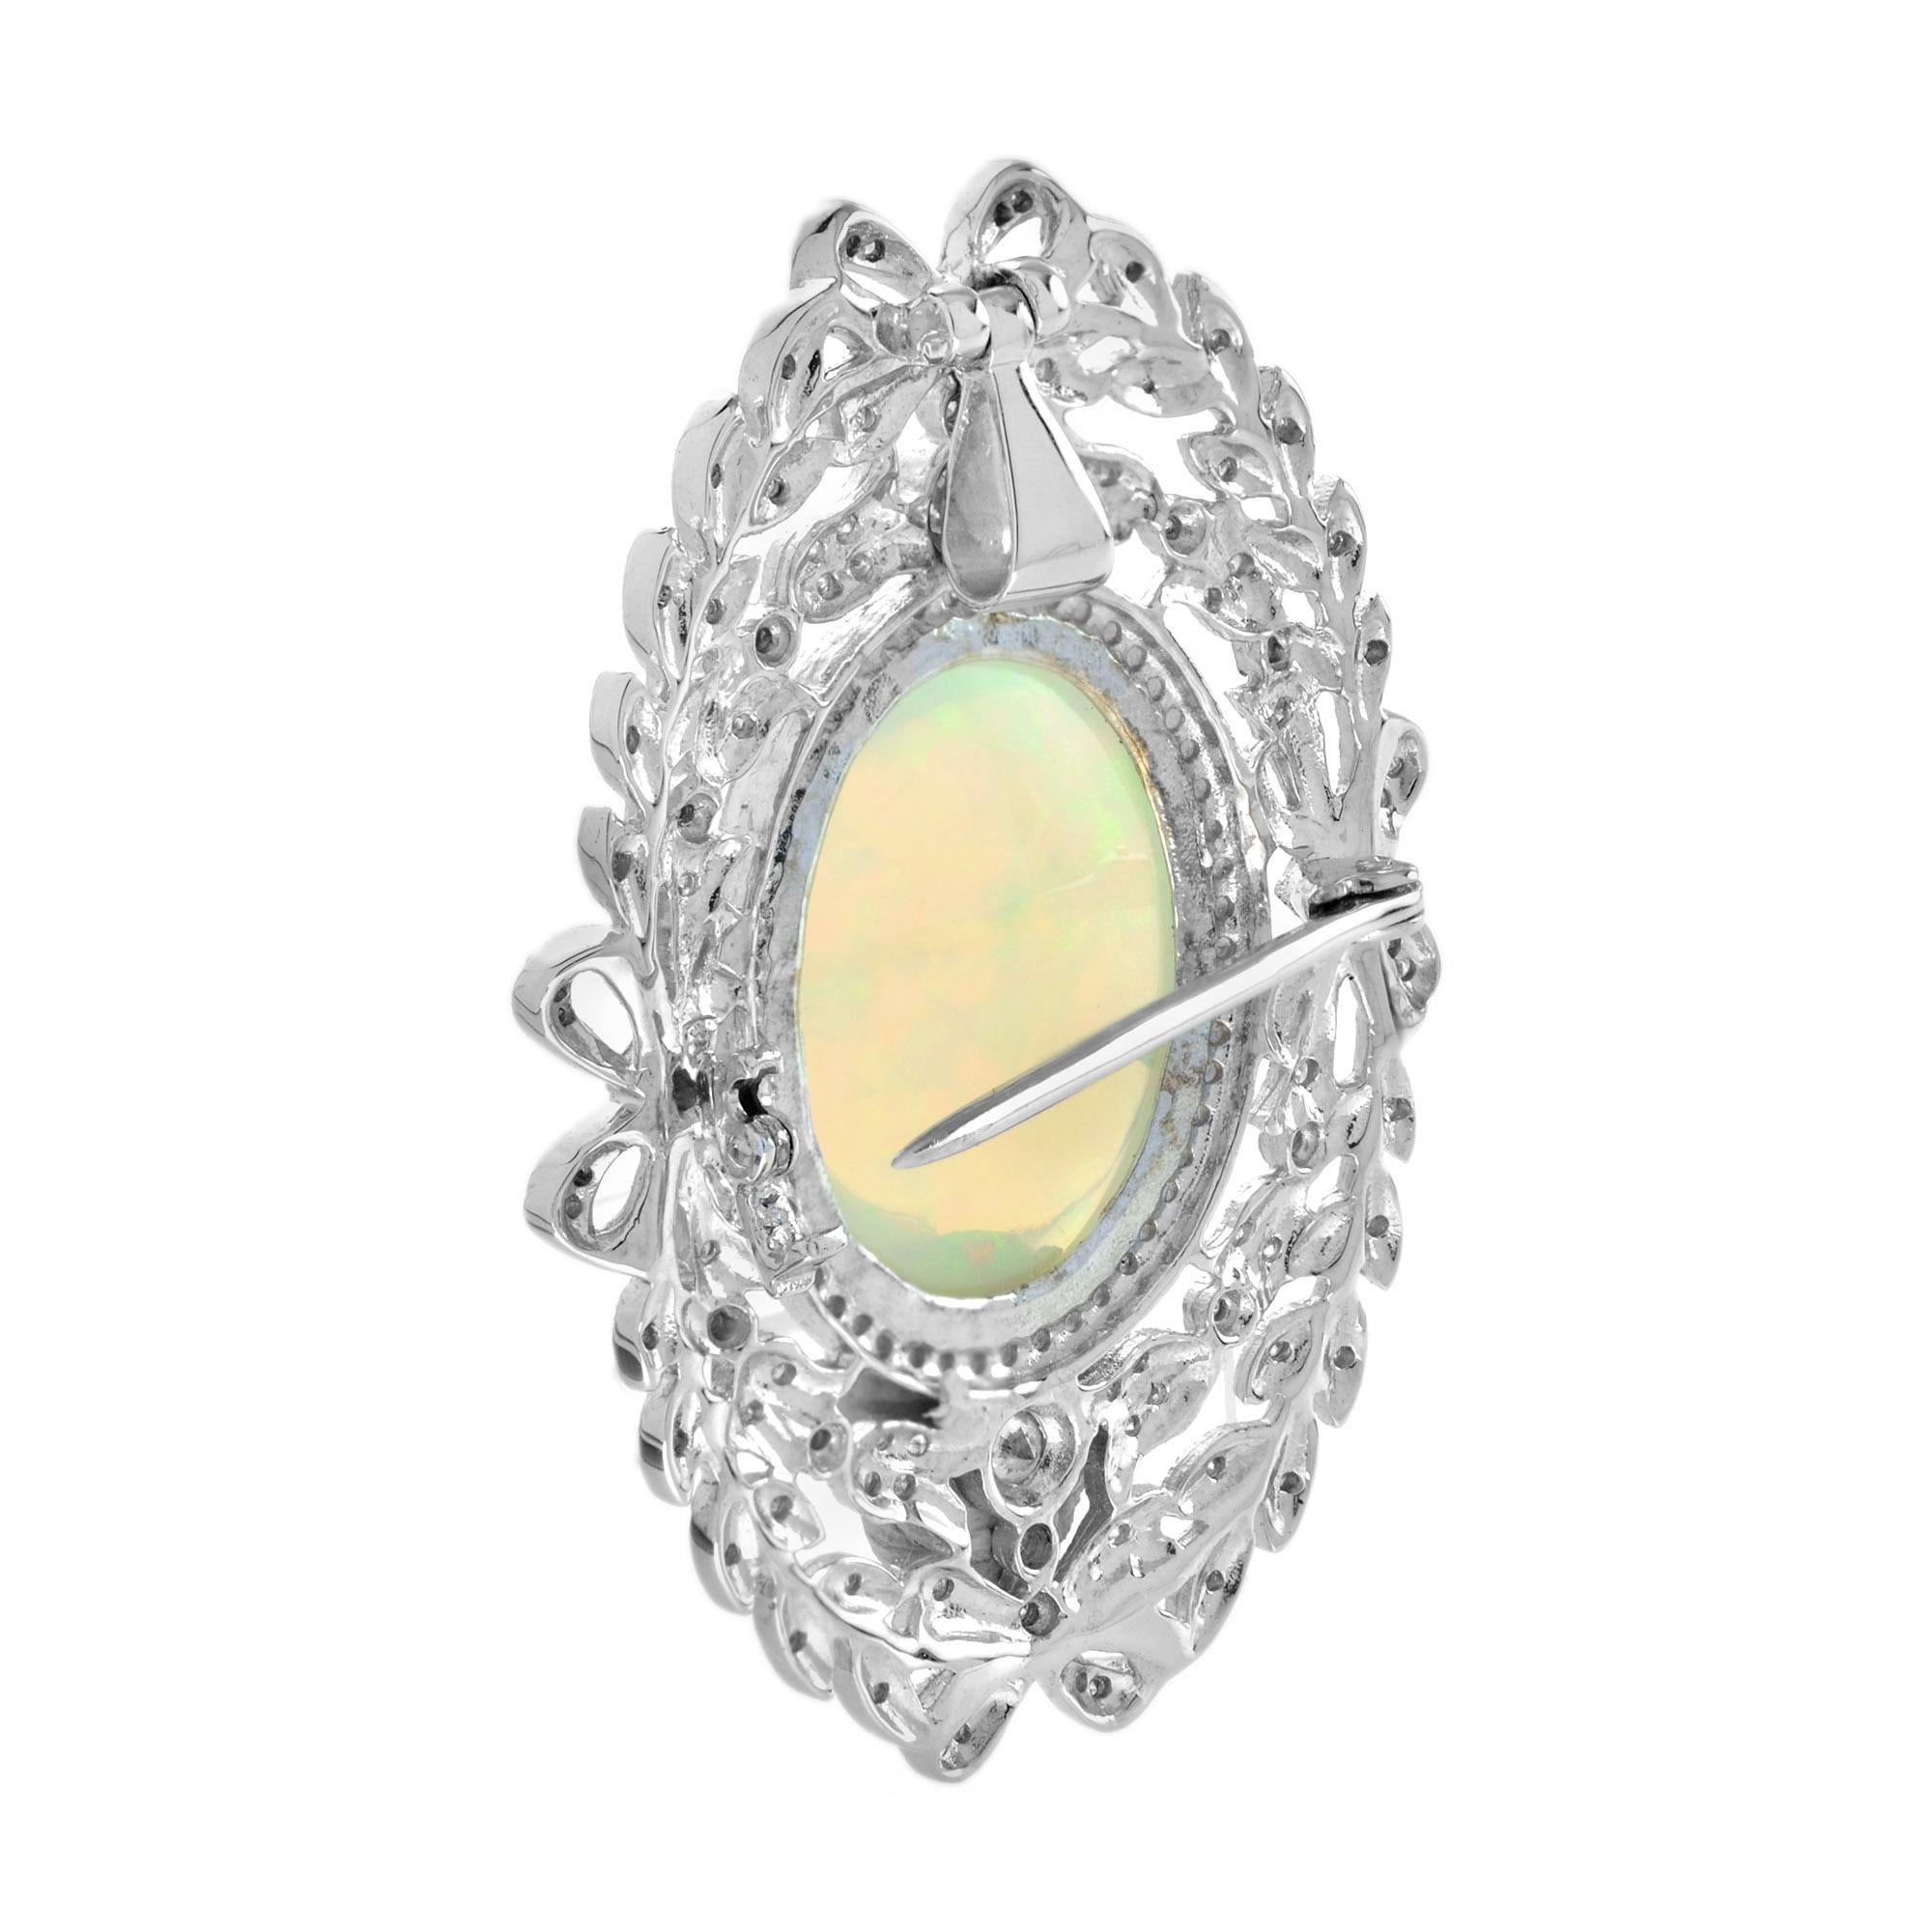 Oval Cut Edwardian Style 13.43 Ct. Ethiopian Opal and Diamond Brooch in 18K White Gold